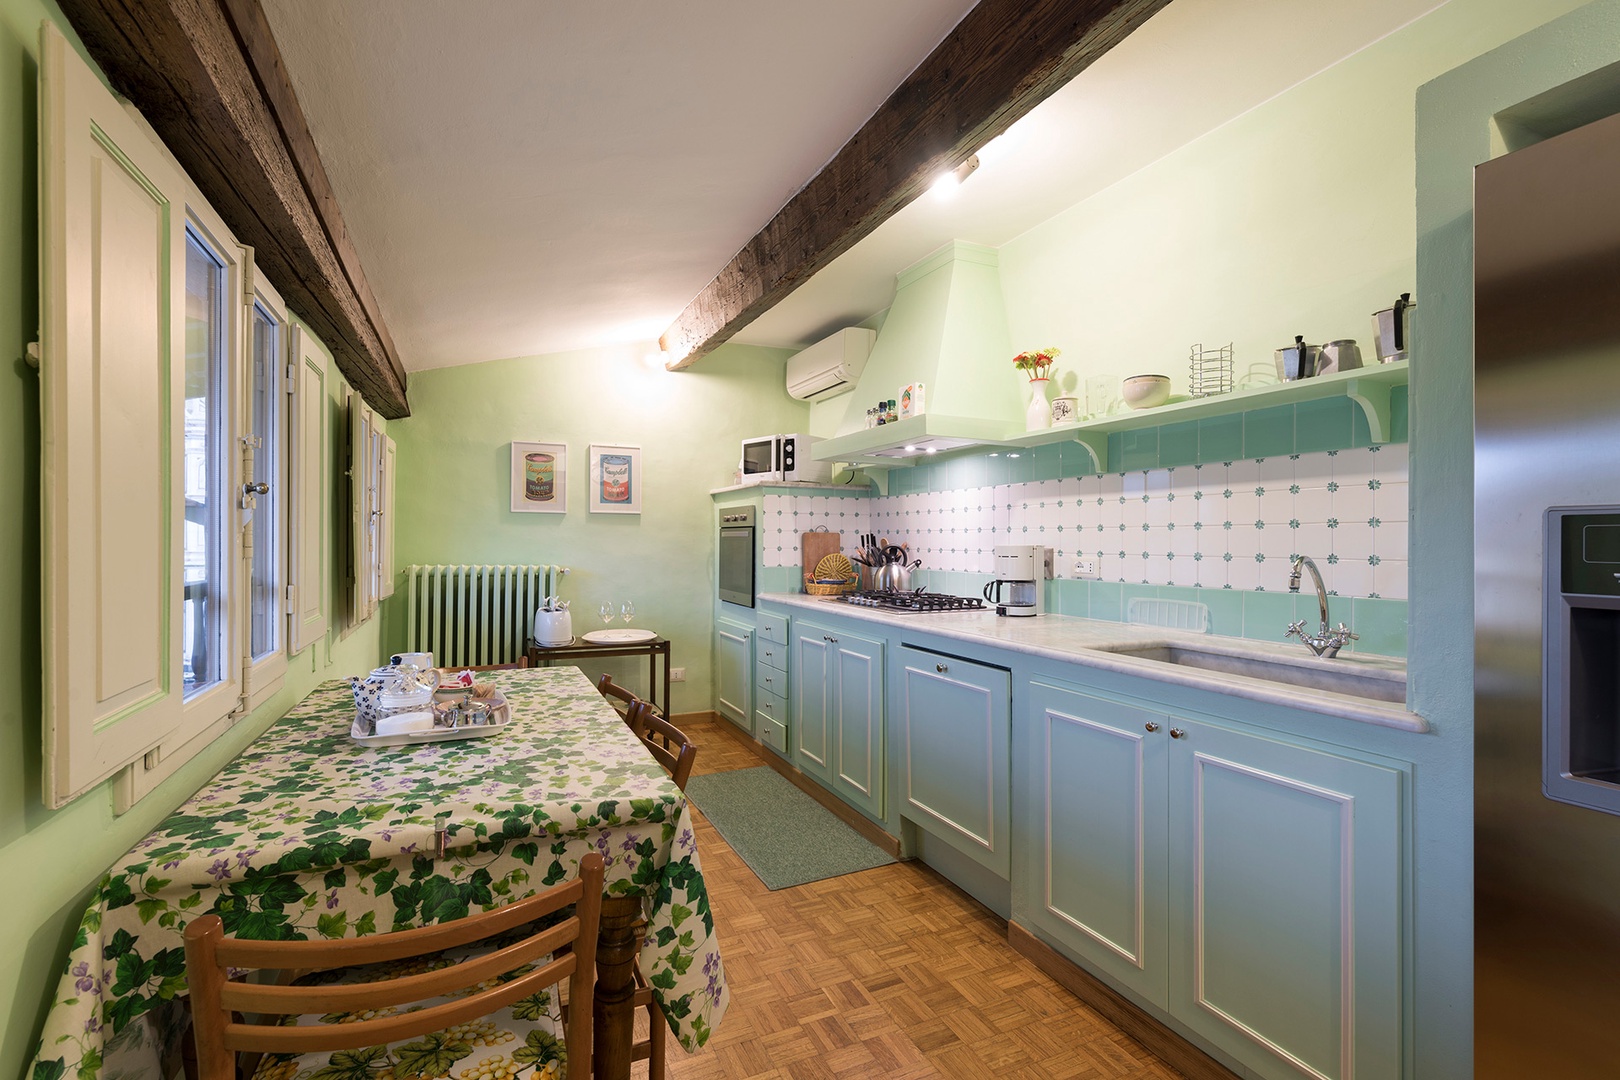 Kitchen has views of the piazza and of the Santa Croce basilica.